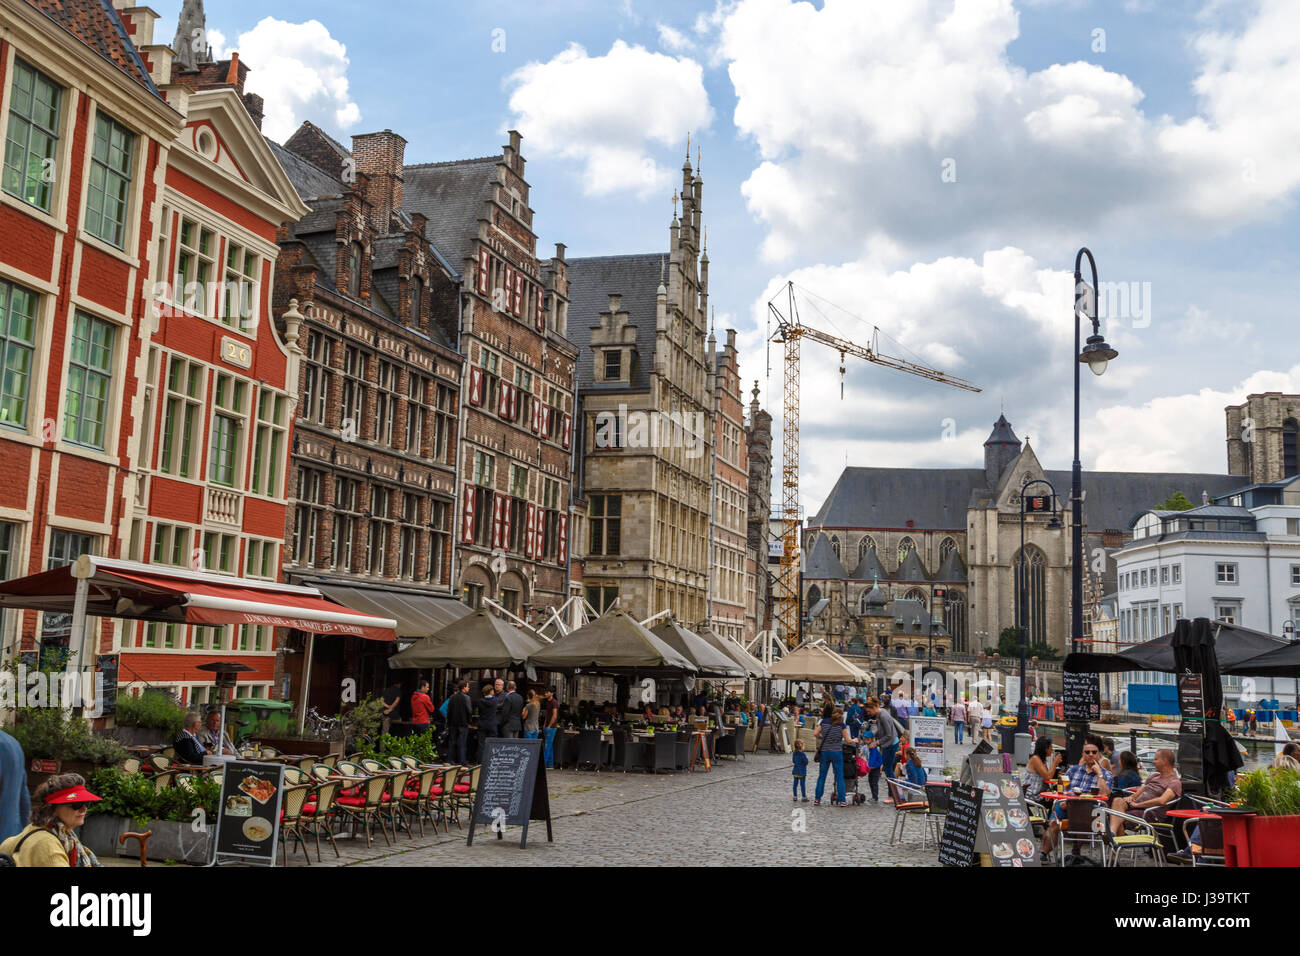 GENT, BELGIUM - JULY 6, 2016 : Medieval Ghent streets with colorful buildings and people. Gent is popular place in Belgium. Stock Photo